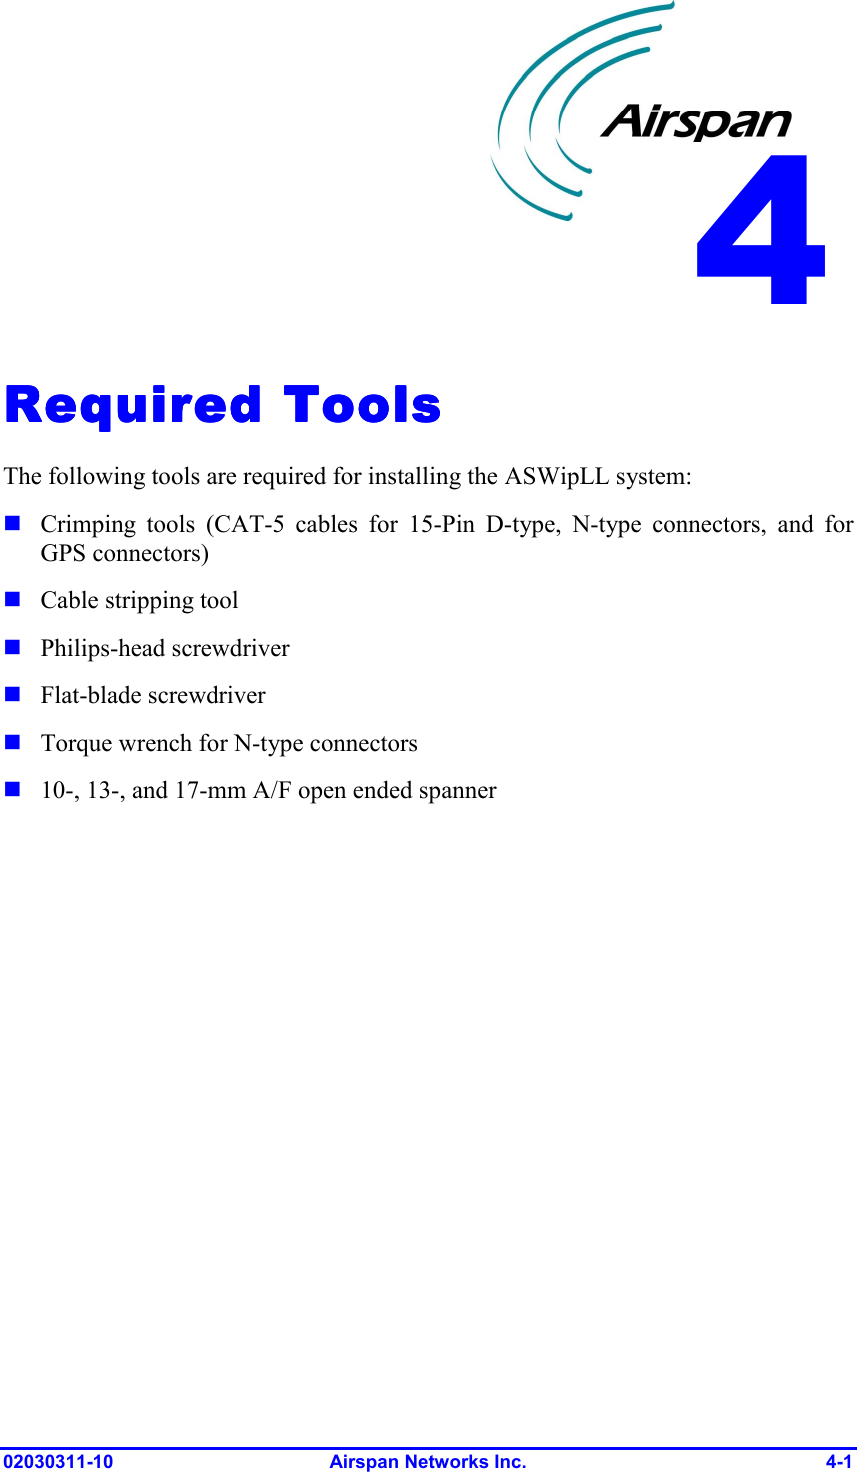  02030311-10 Airspan Networks Inc.  4-1 Required ToolsRequired ToolsRequired ToolsRequired Tools    The following tools are required for installing the ASWipLL system:  Crimping tools (CAT-5 cables for 15-Pin D-type, N-type connectors, and for GPS connectors)  Cable stripping tool  Philips-head screwdriver  Flat-blade screwdriver  Torque wrench for N-type connectors  10-, 13-, and 17-mm A/F open ended spanner  4 